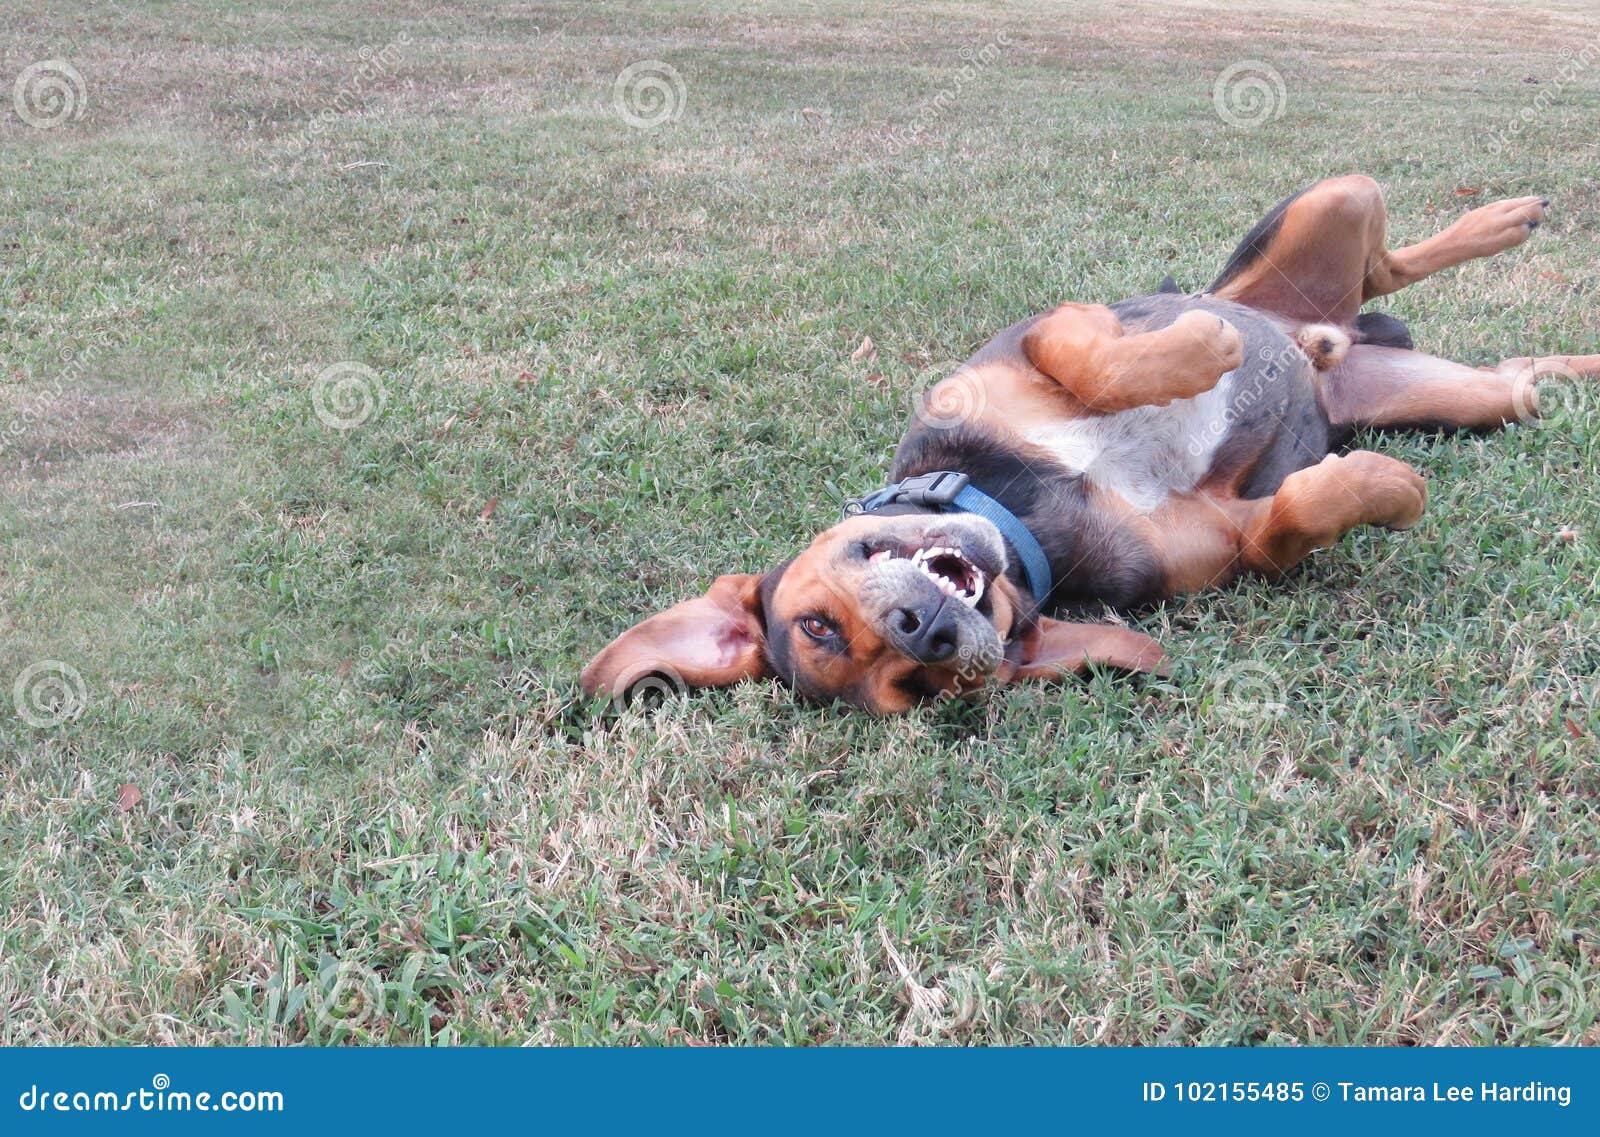 silly dog playing rolling in grass